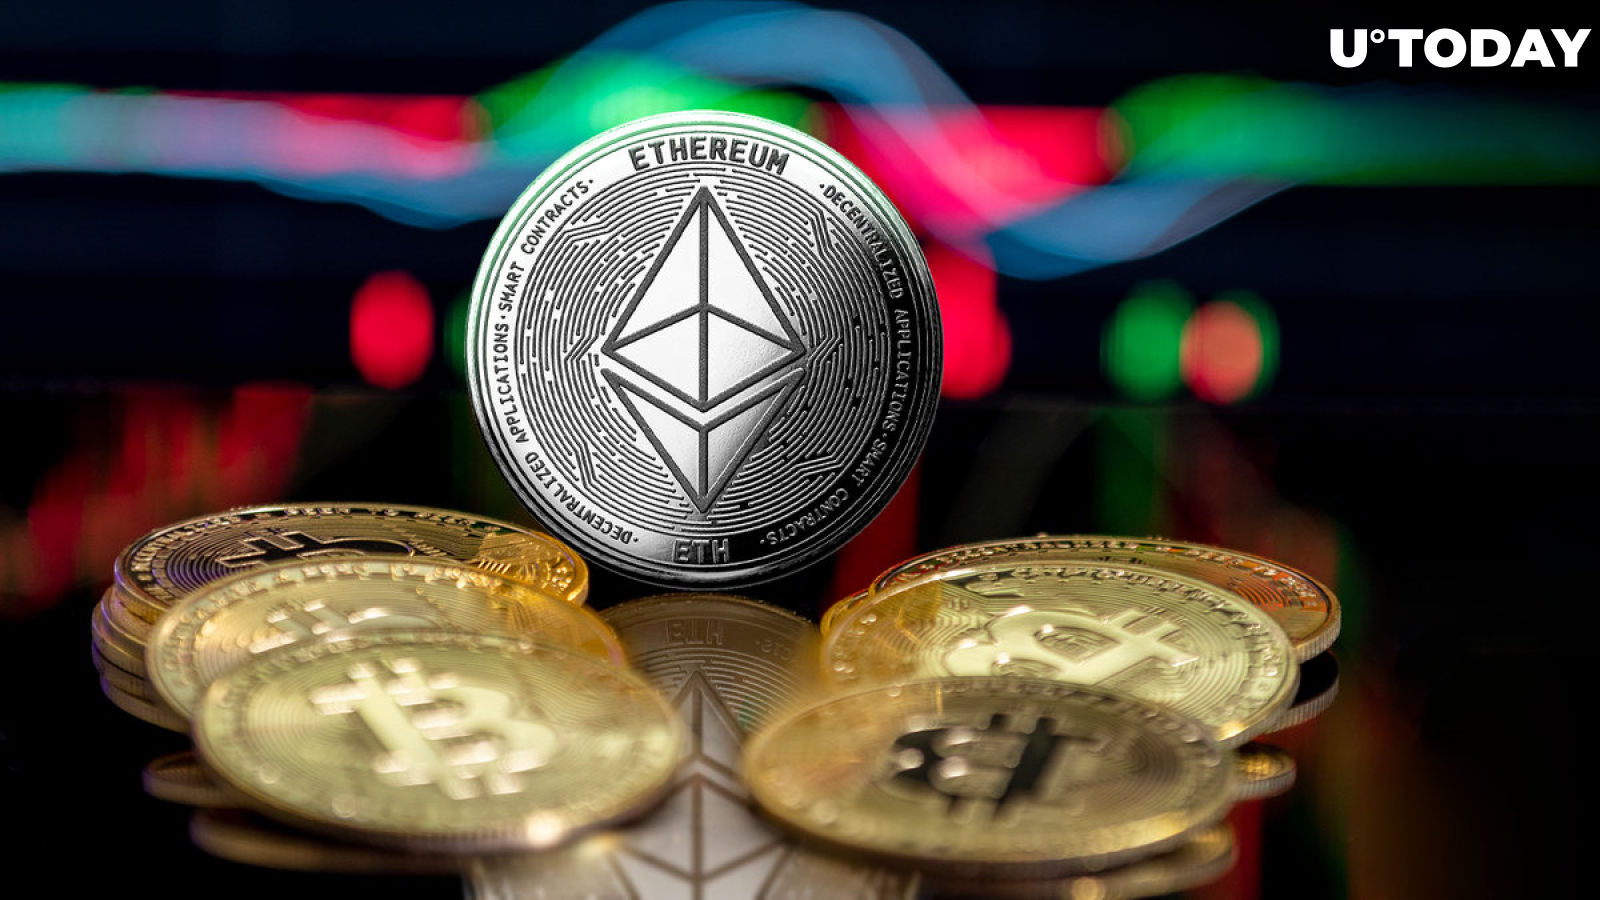 Ethereum (ETH) Surpassed Bitcoin (BTC) for Second Time Ever